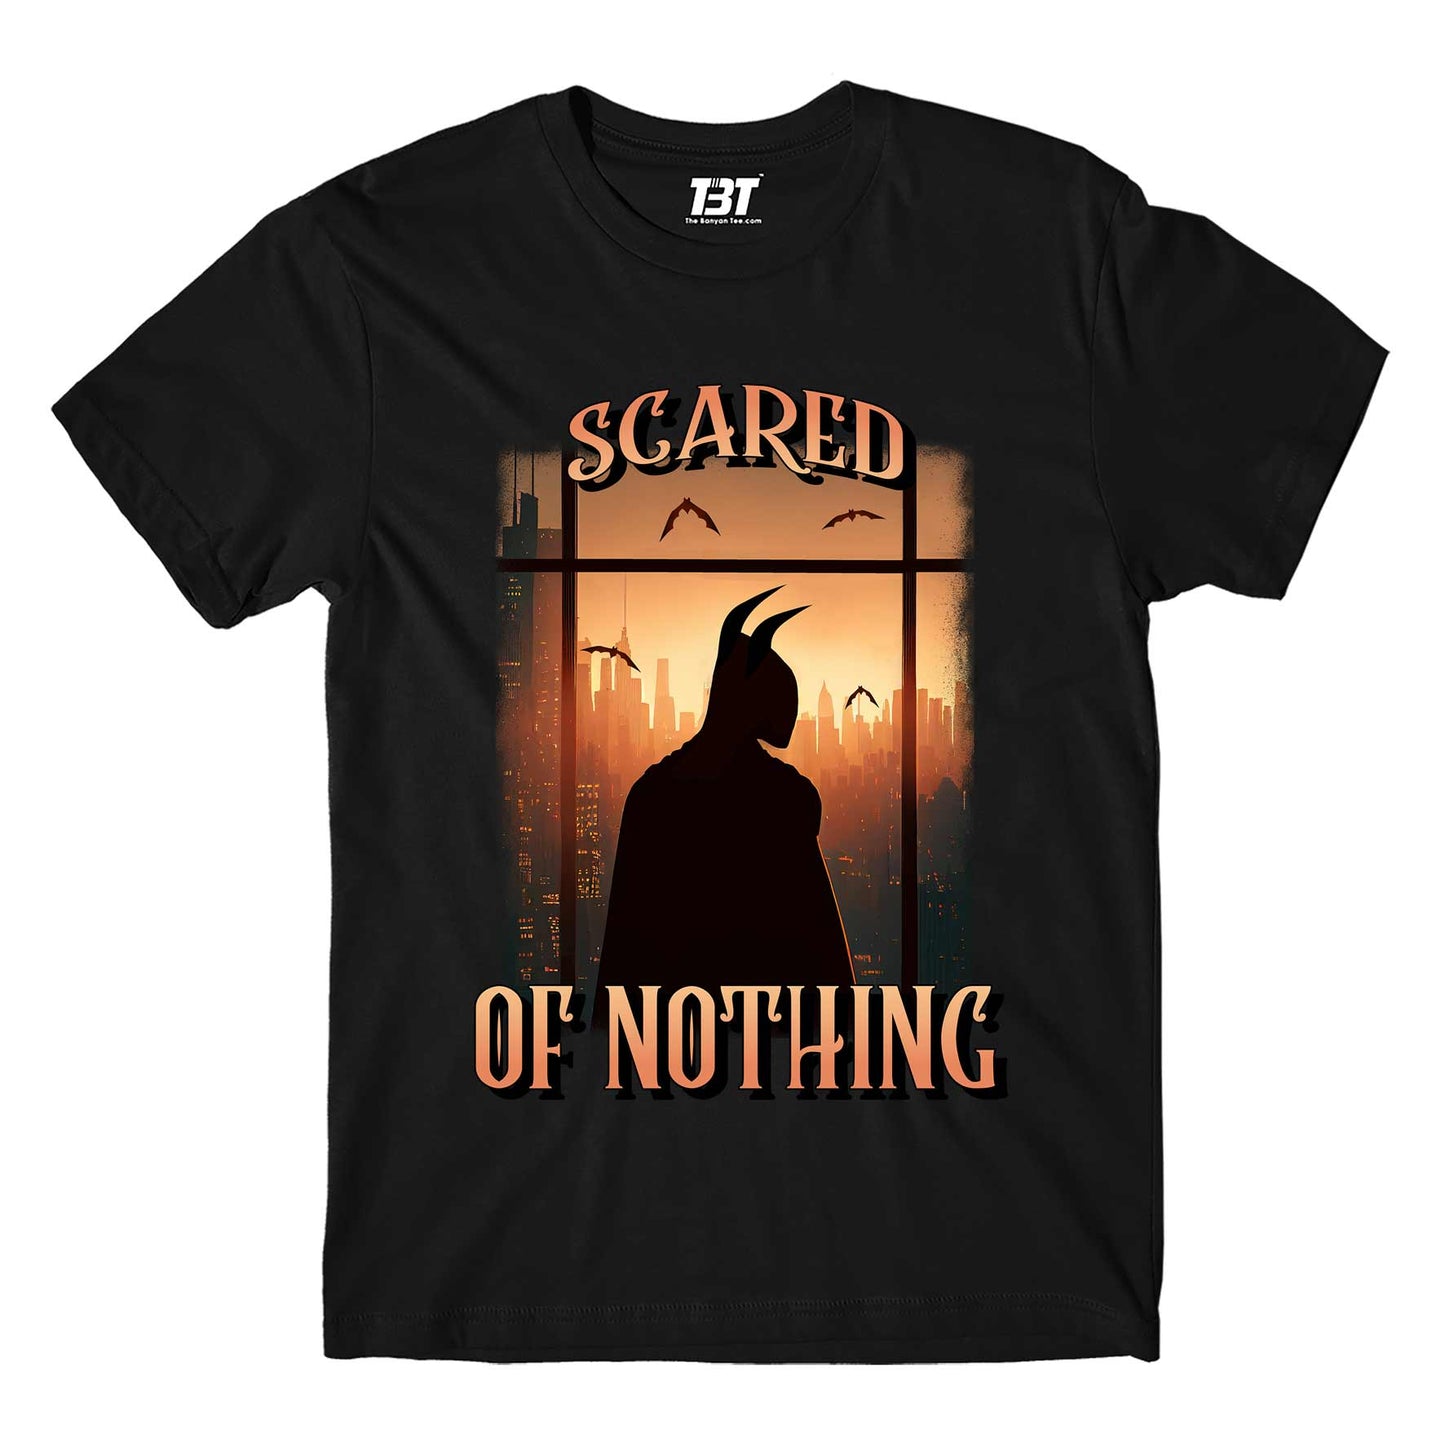 superheroes scared of nothing t-shirt tv & movies buy online united states of america usa the banyan tee tbt men women girls boys unisex black 